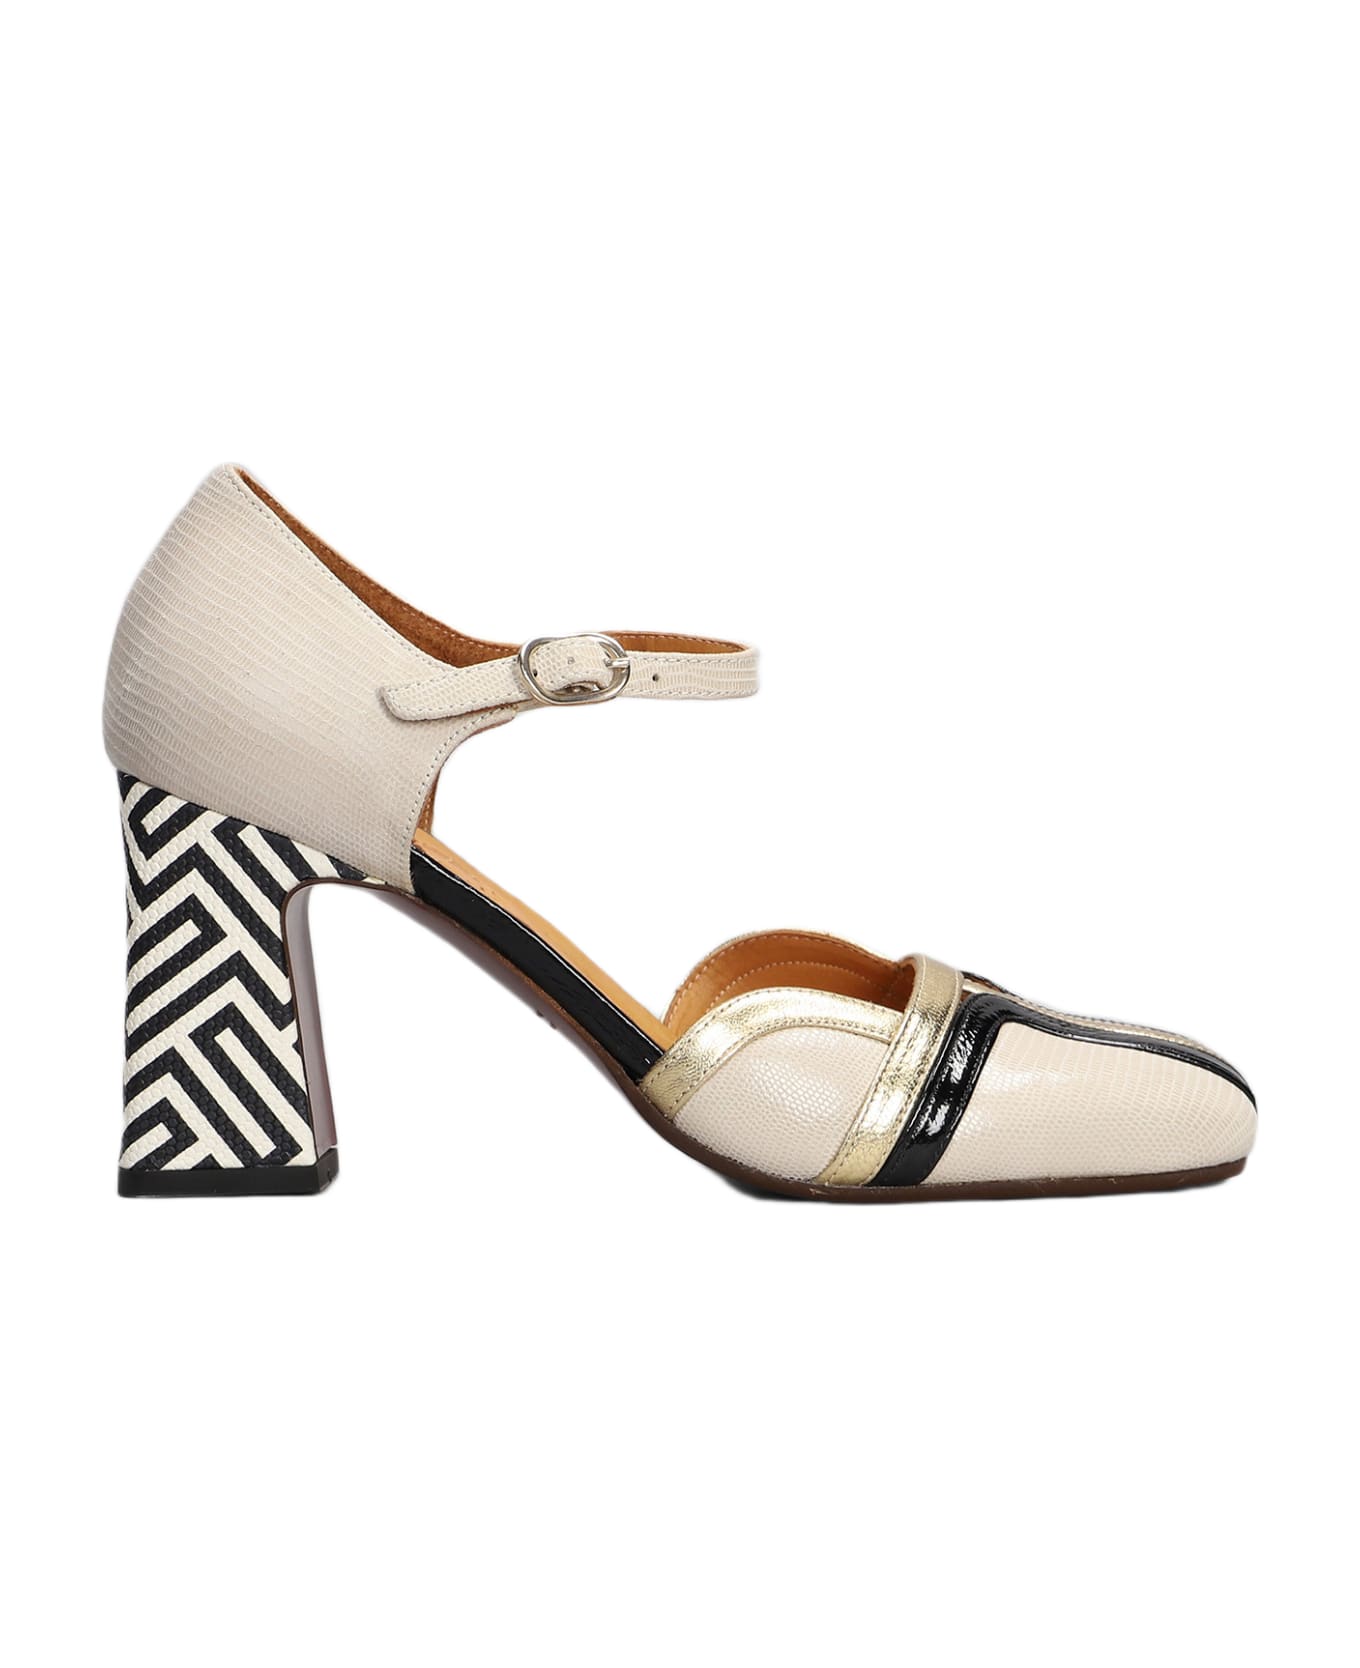 Chie Mihara Olali Pumps In Beige Leather - beige ハイヒール